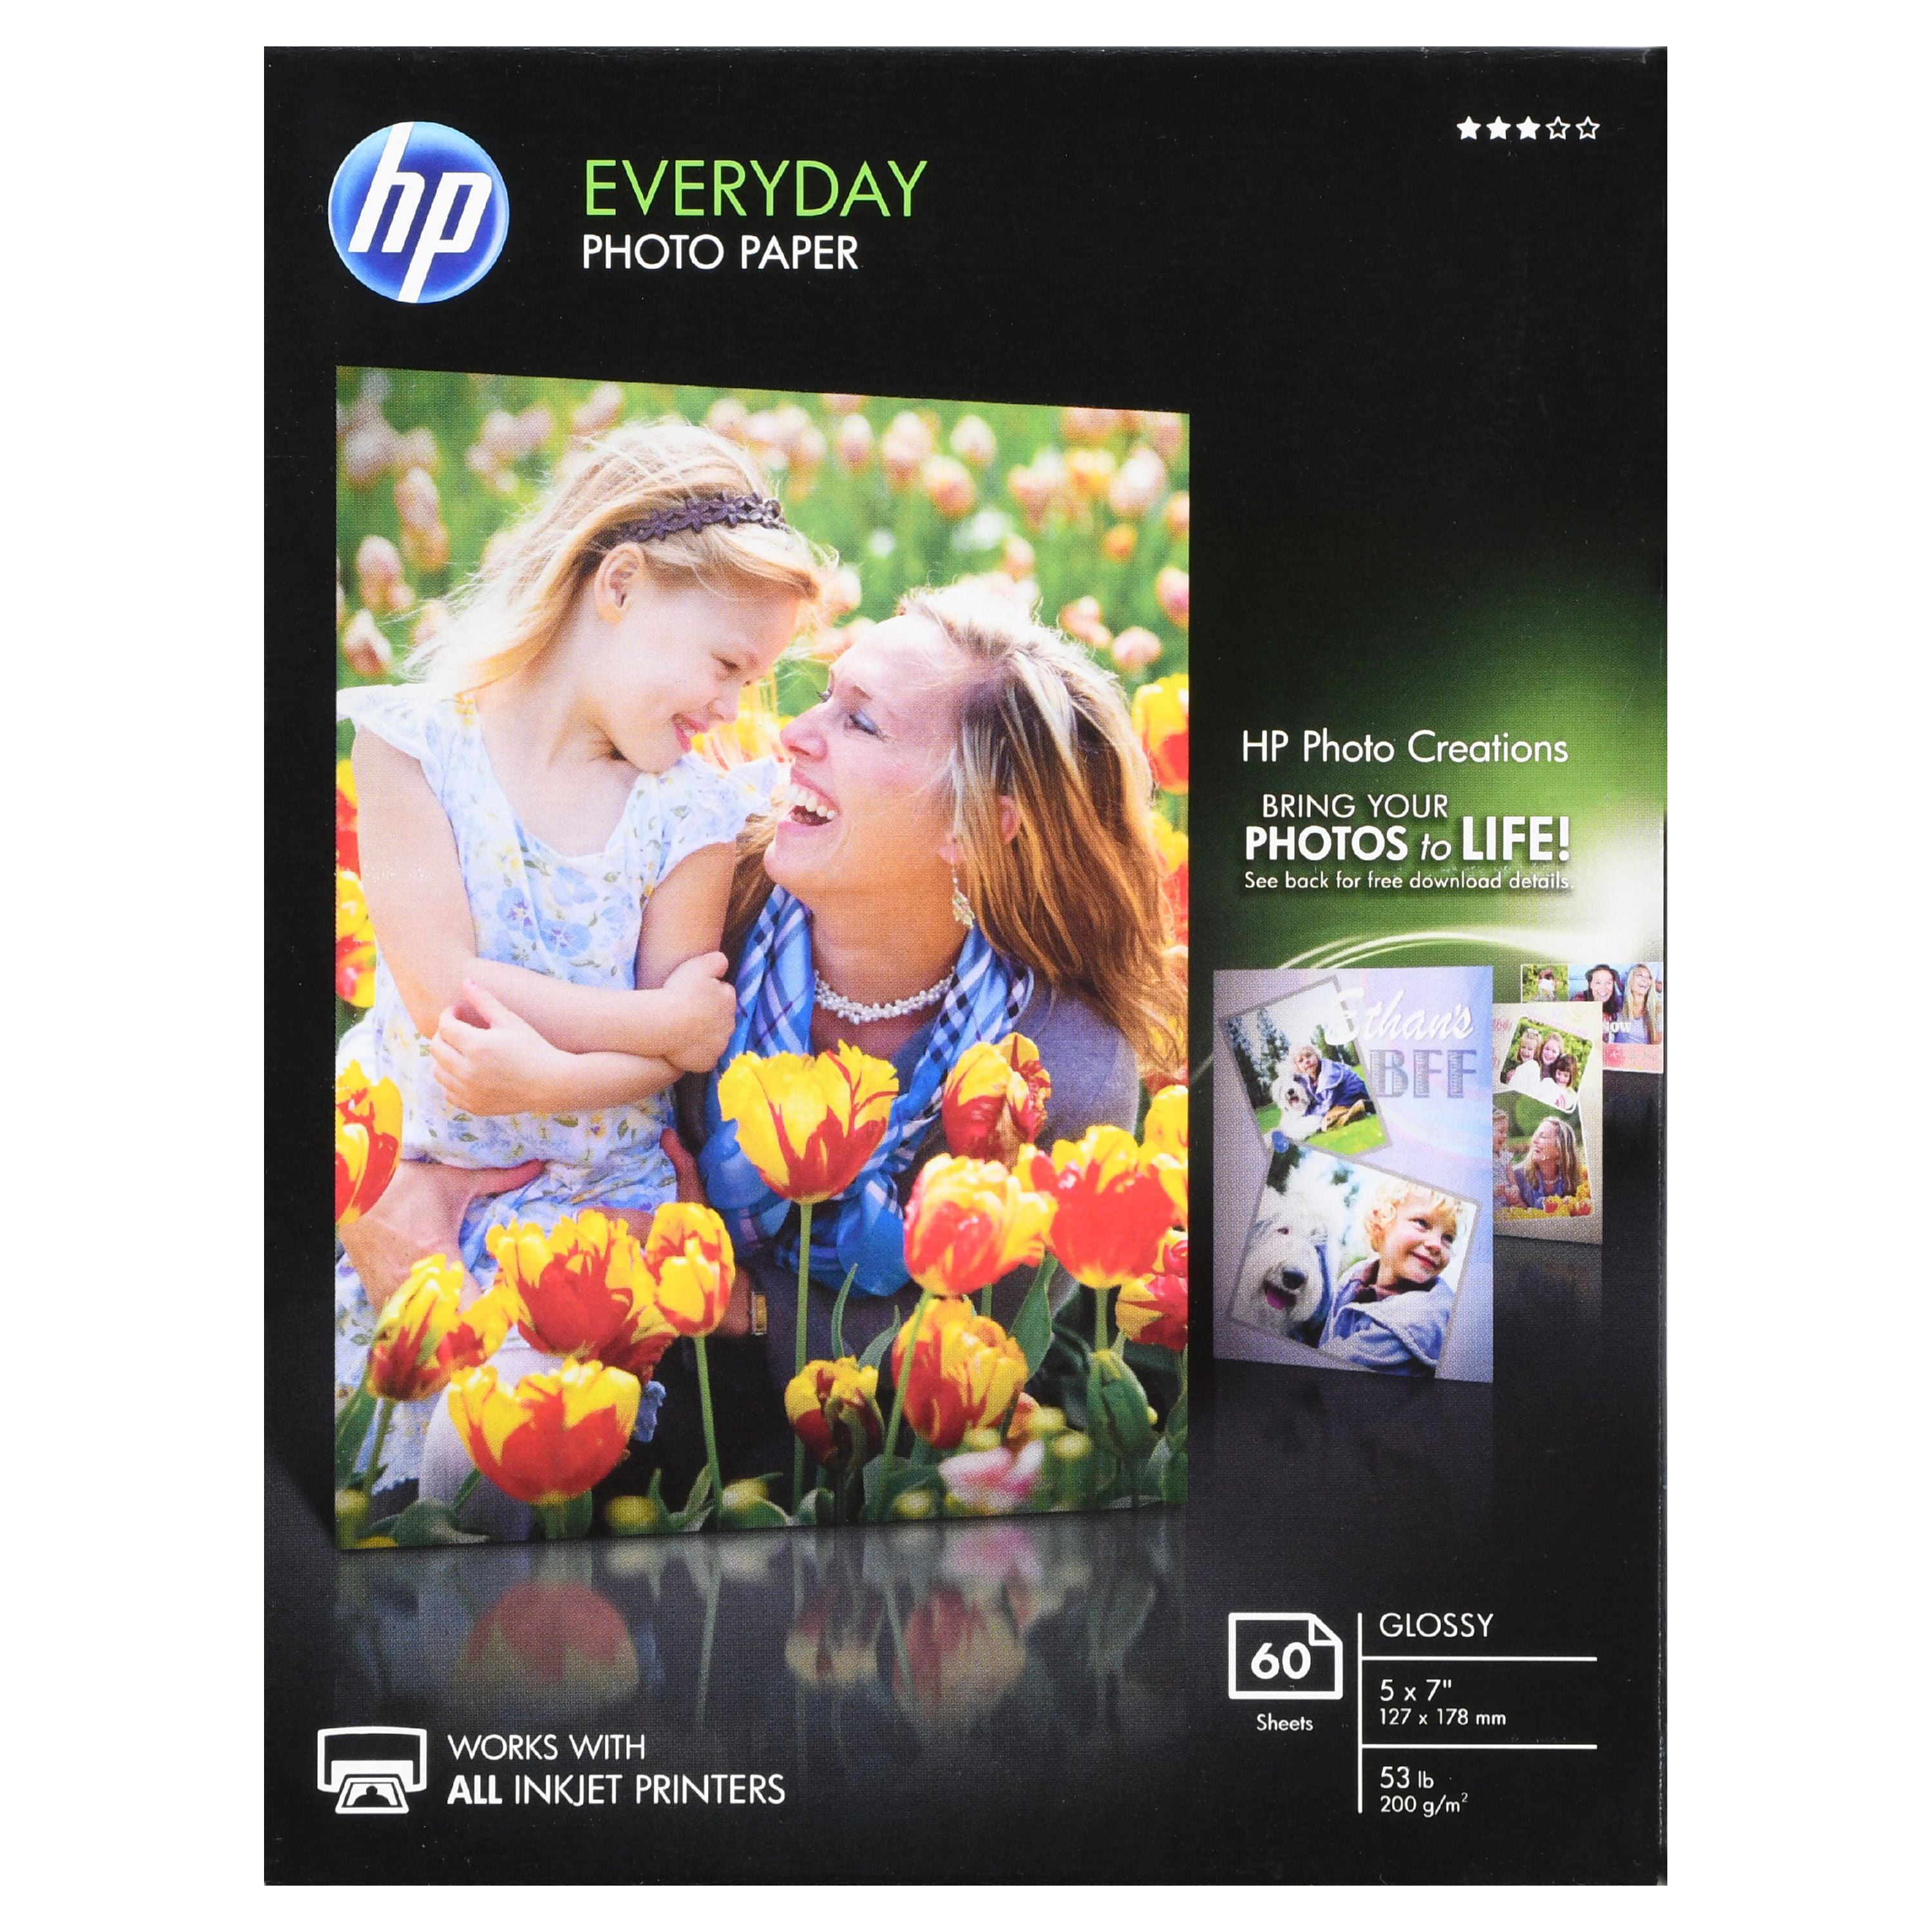 Details about   HP Photo Card Kit with 10 sheets of 5x7-Inch Glossy Photo Paper and Envelopes an 